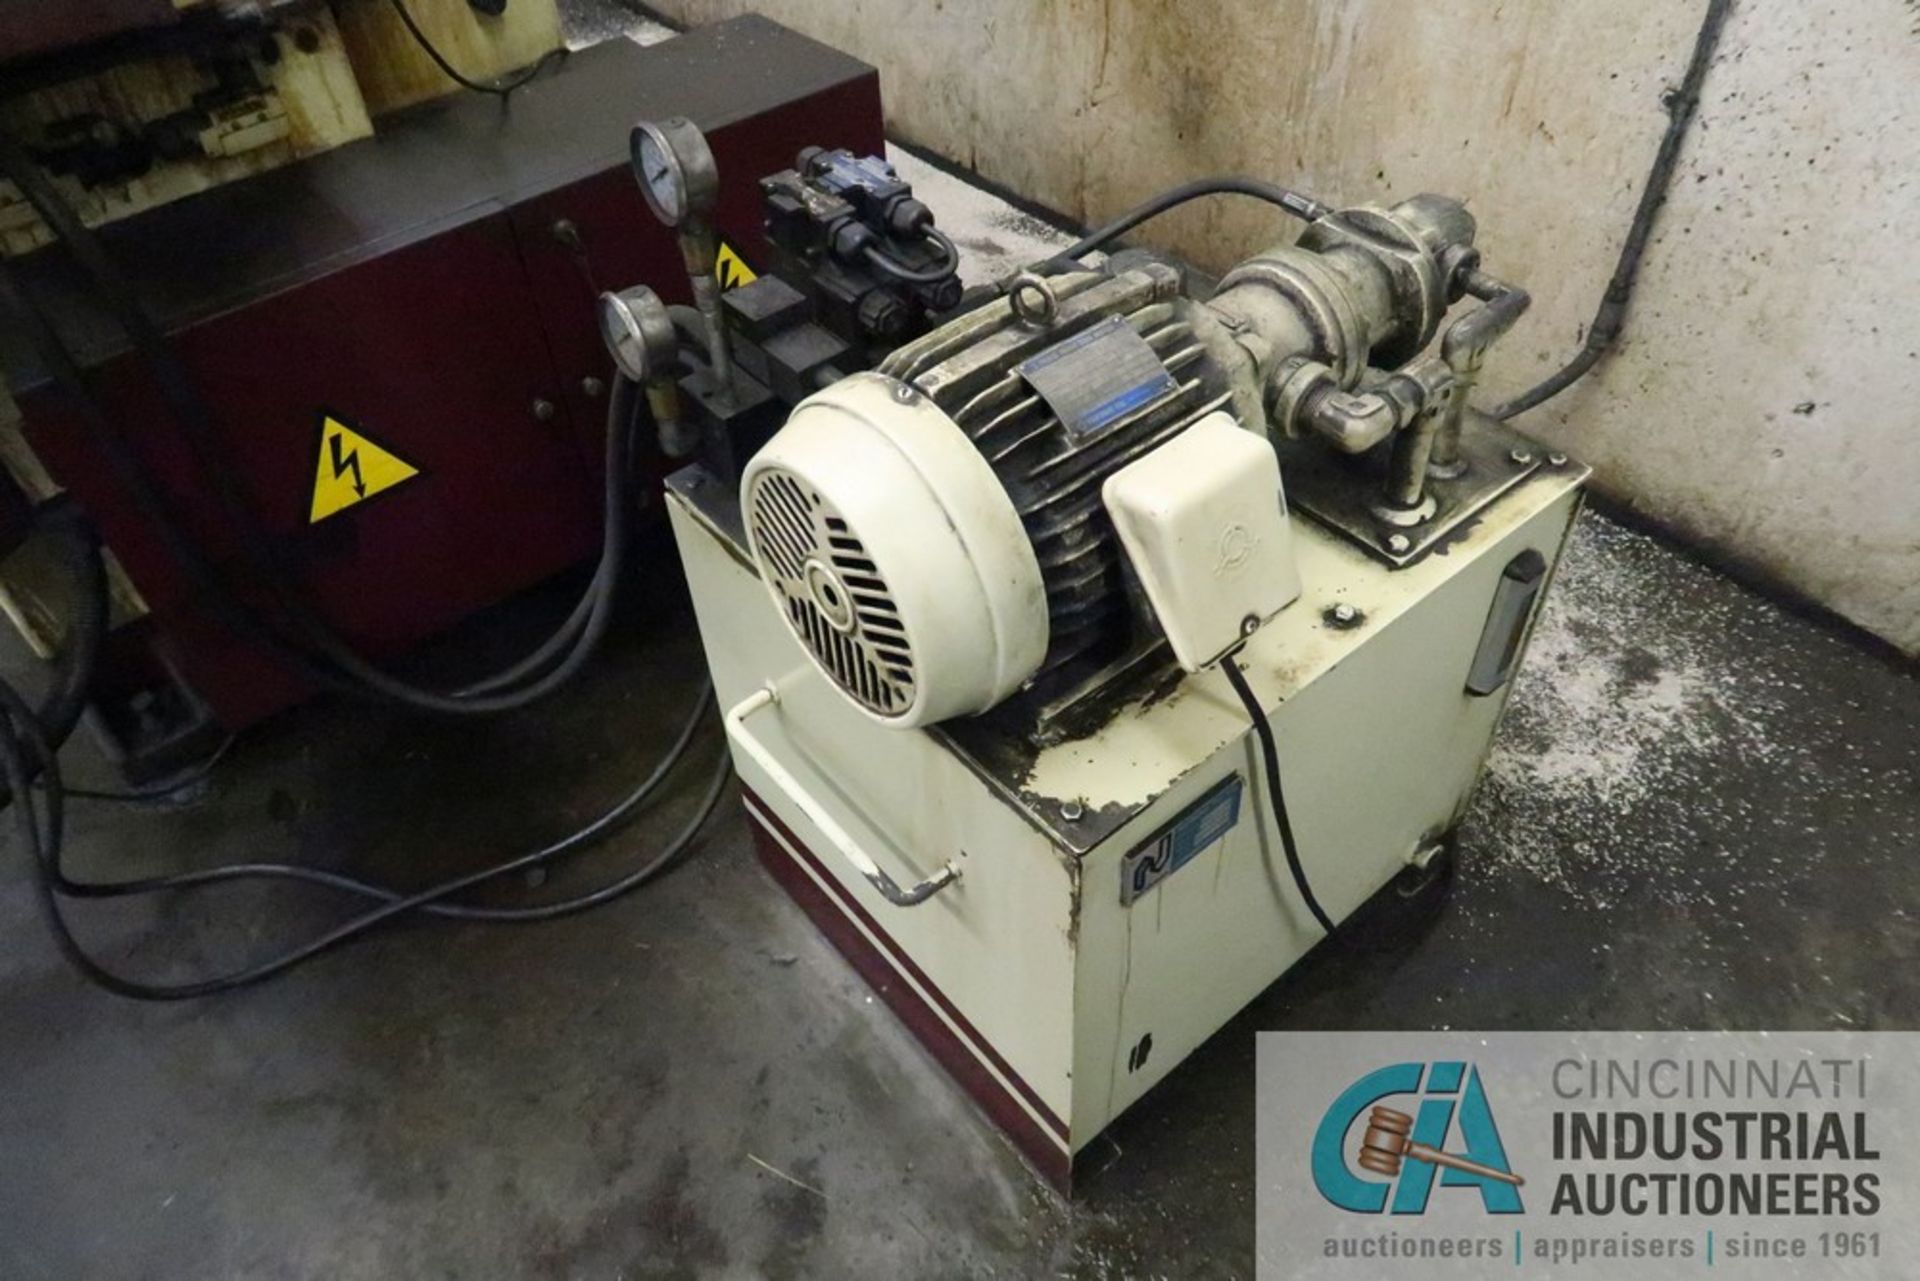 8" X 18" ACER MODEL AGS-1020 HD HYDRAULIC SURFACE GRINDER; S/N 971010, ACER MAGNETIC CHUCK, - Image 8 of 10